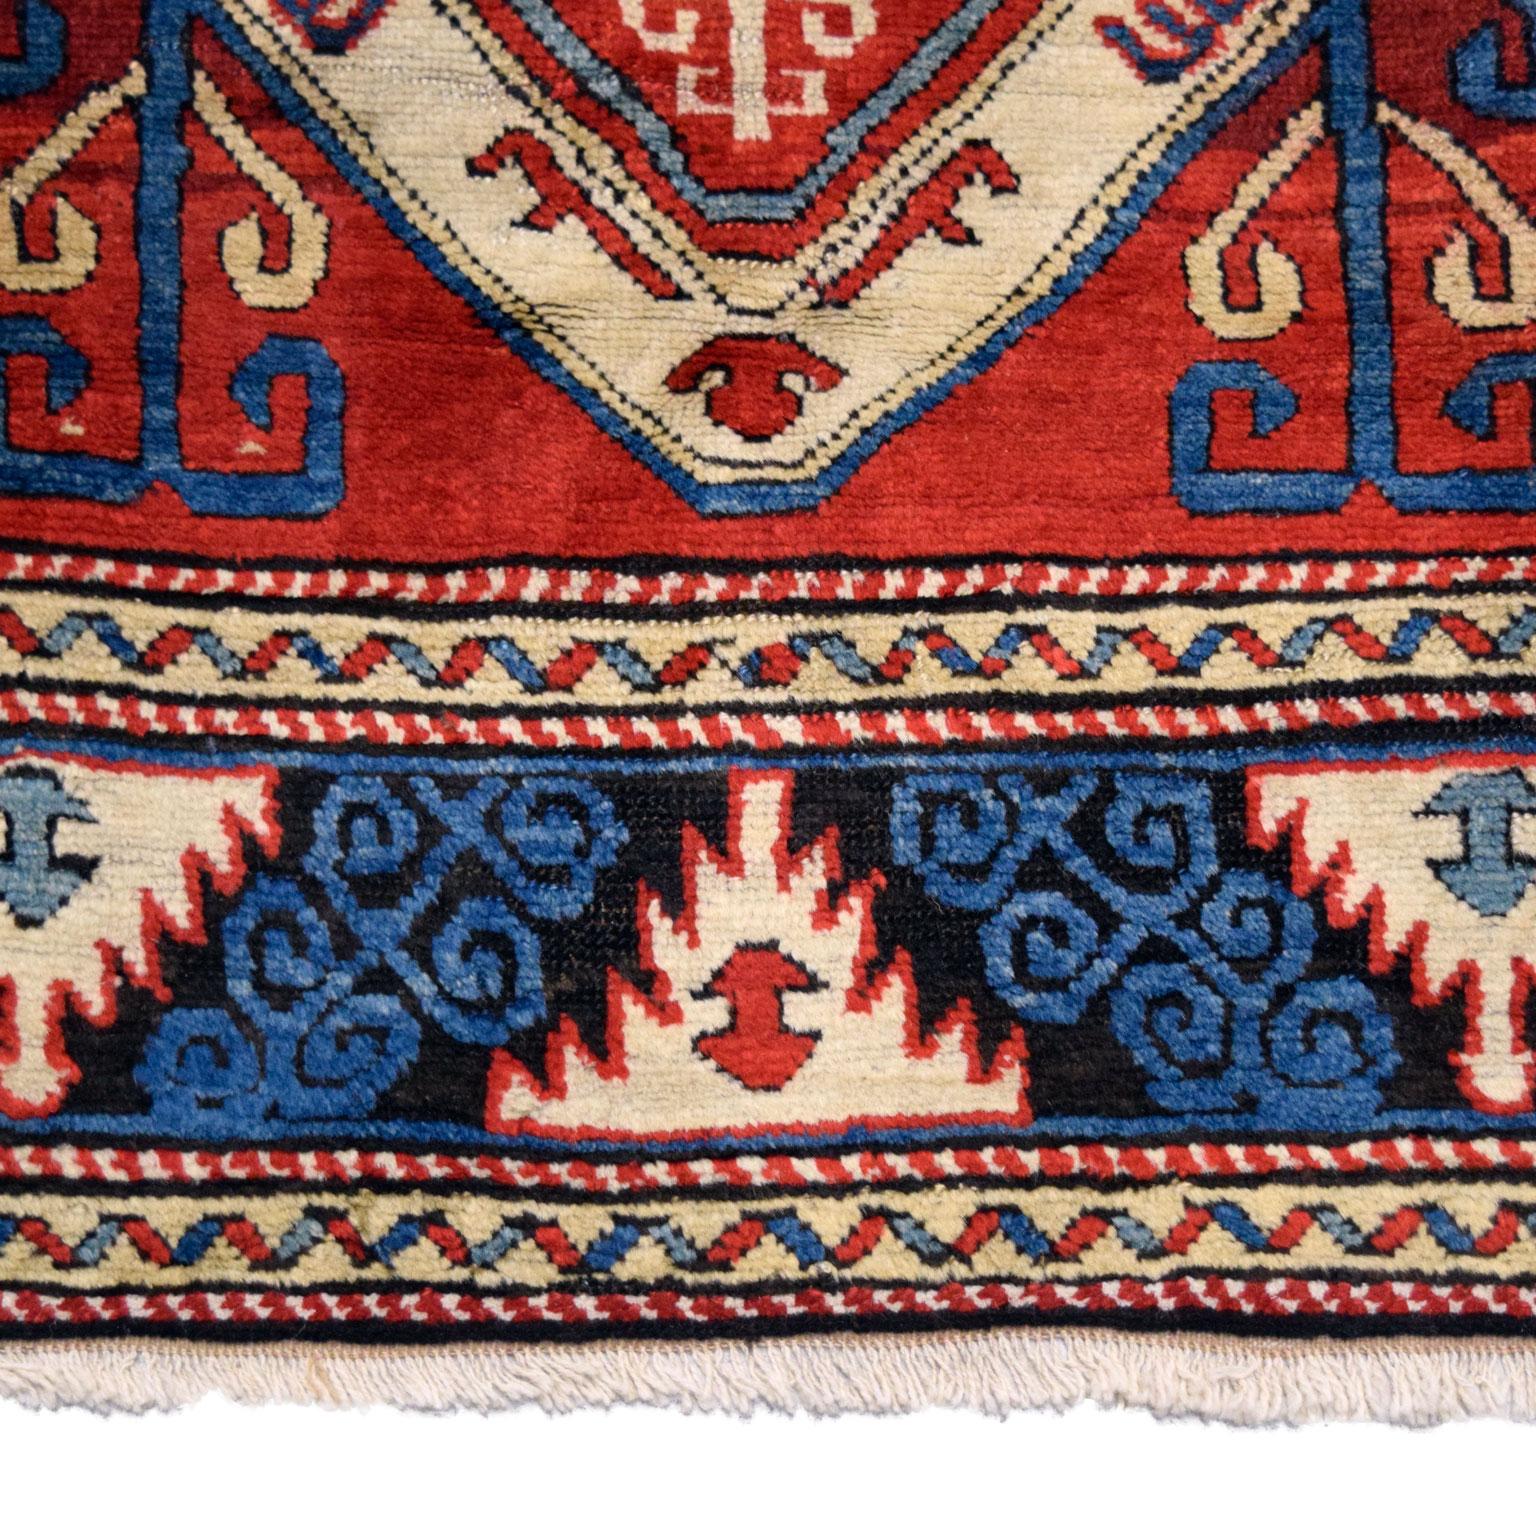 Late 19th Century Antique 1880s Caucasian Rug, Red, Blue, and Cream, 5' x 7' For Sale